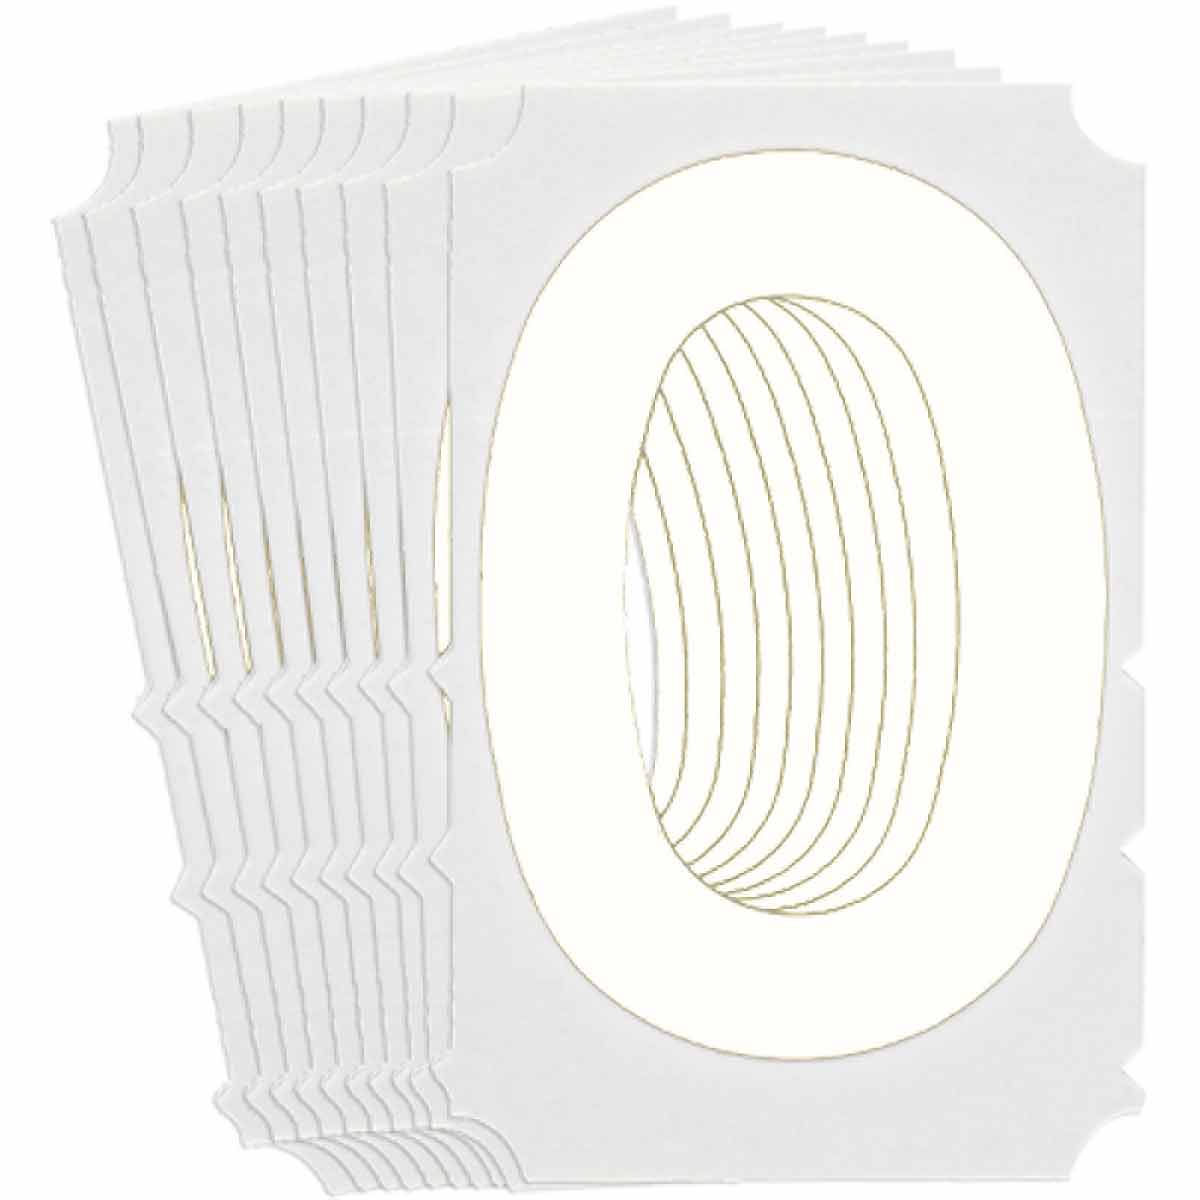 6 Height Legend T 10 per Package White Quik-Align Labels Brady 5210-T 10 per Package 6 Height Legend T 